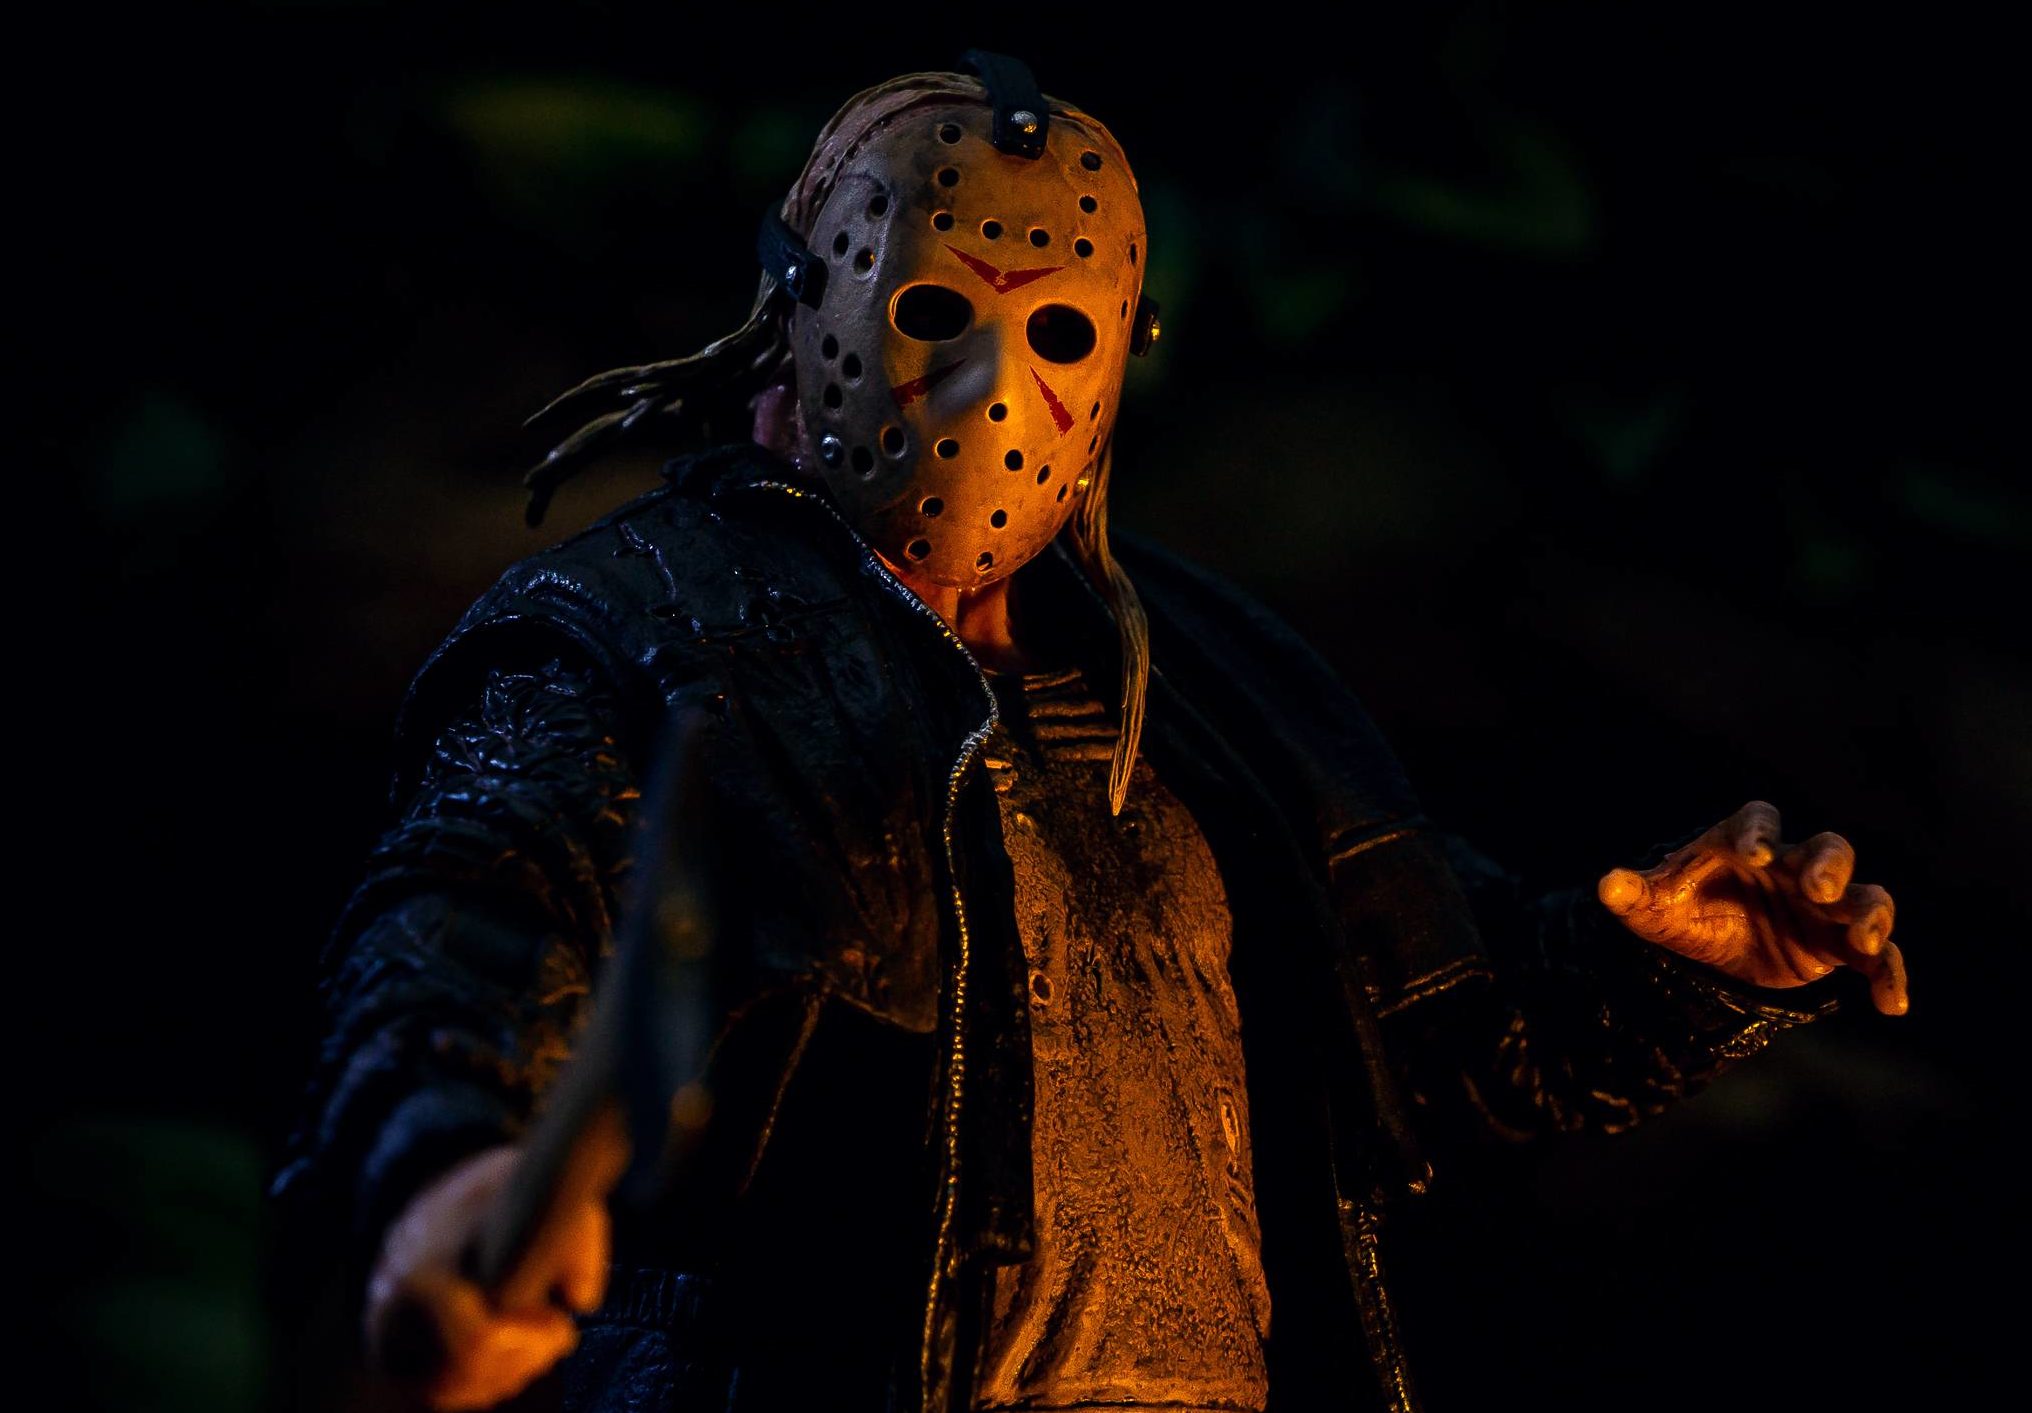 Derek Mears in "Friday the 13th" 2009) .